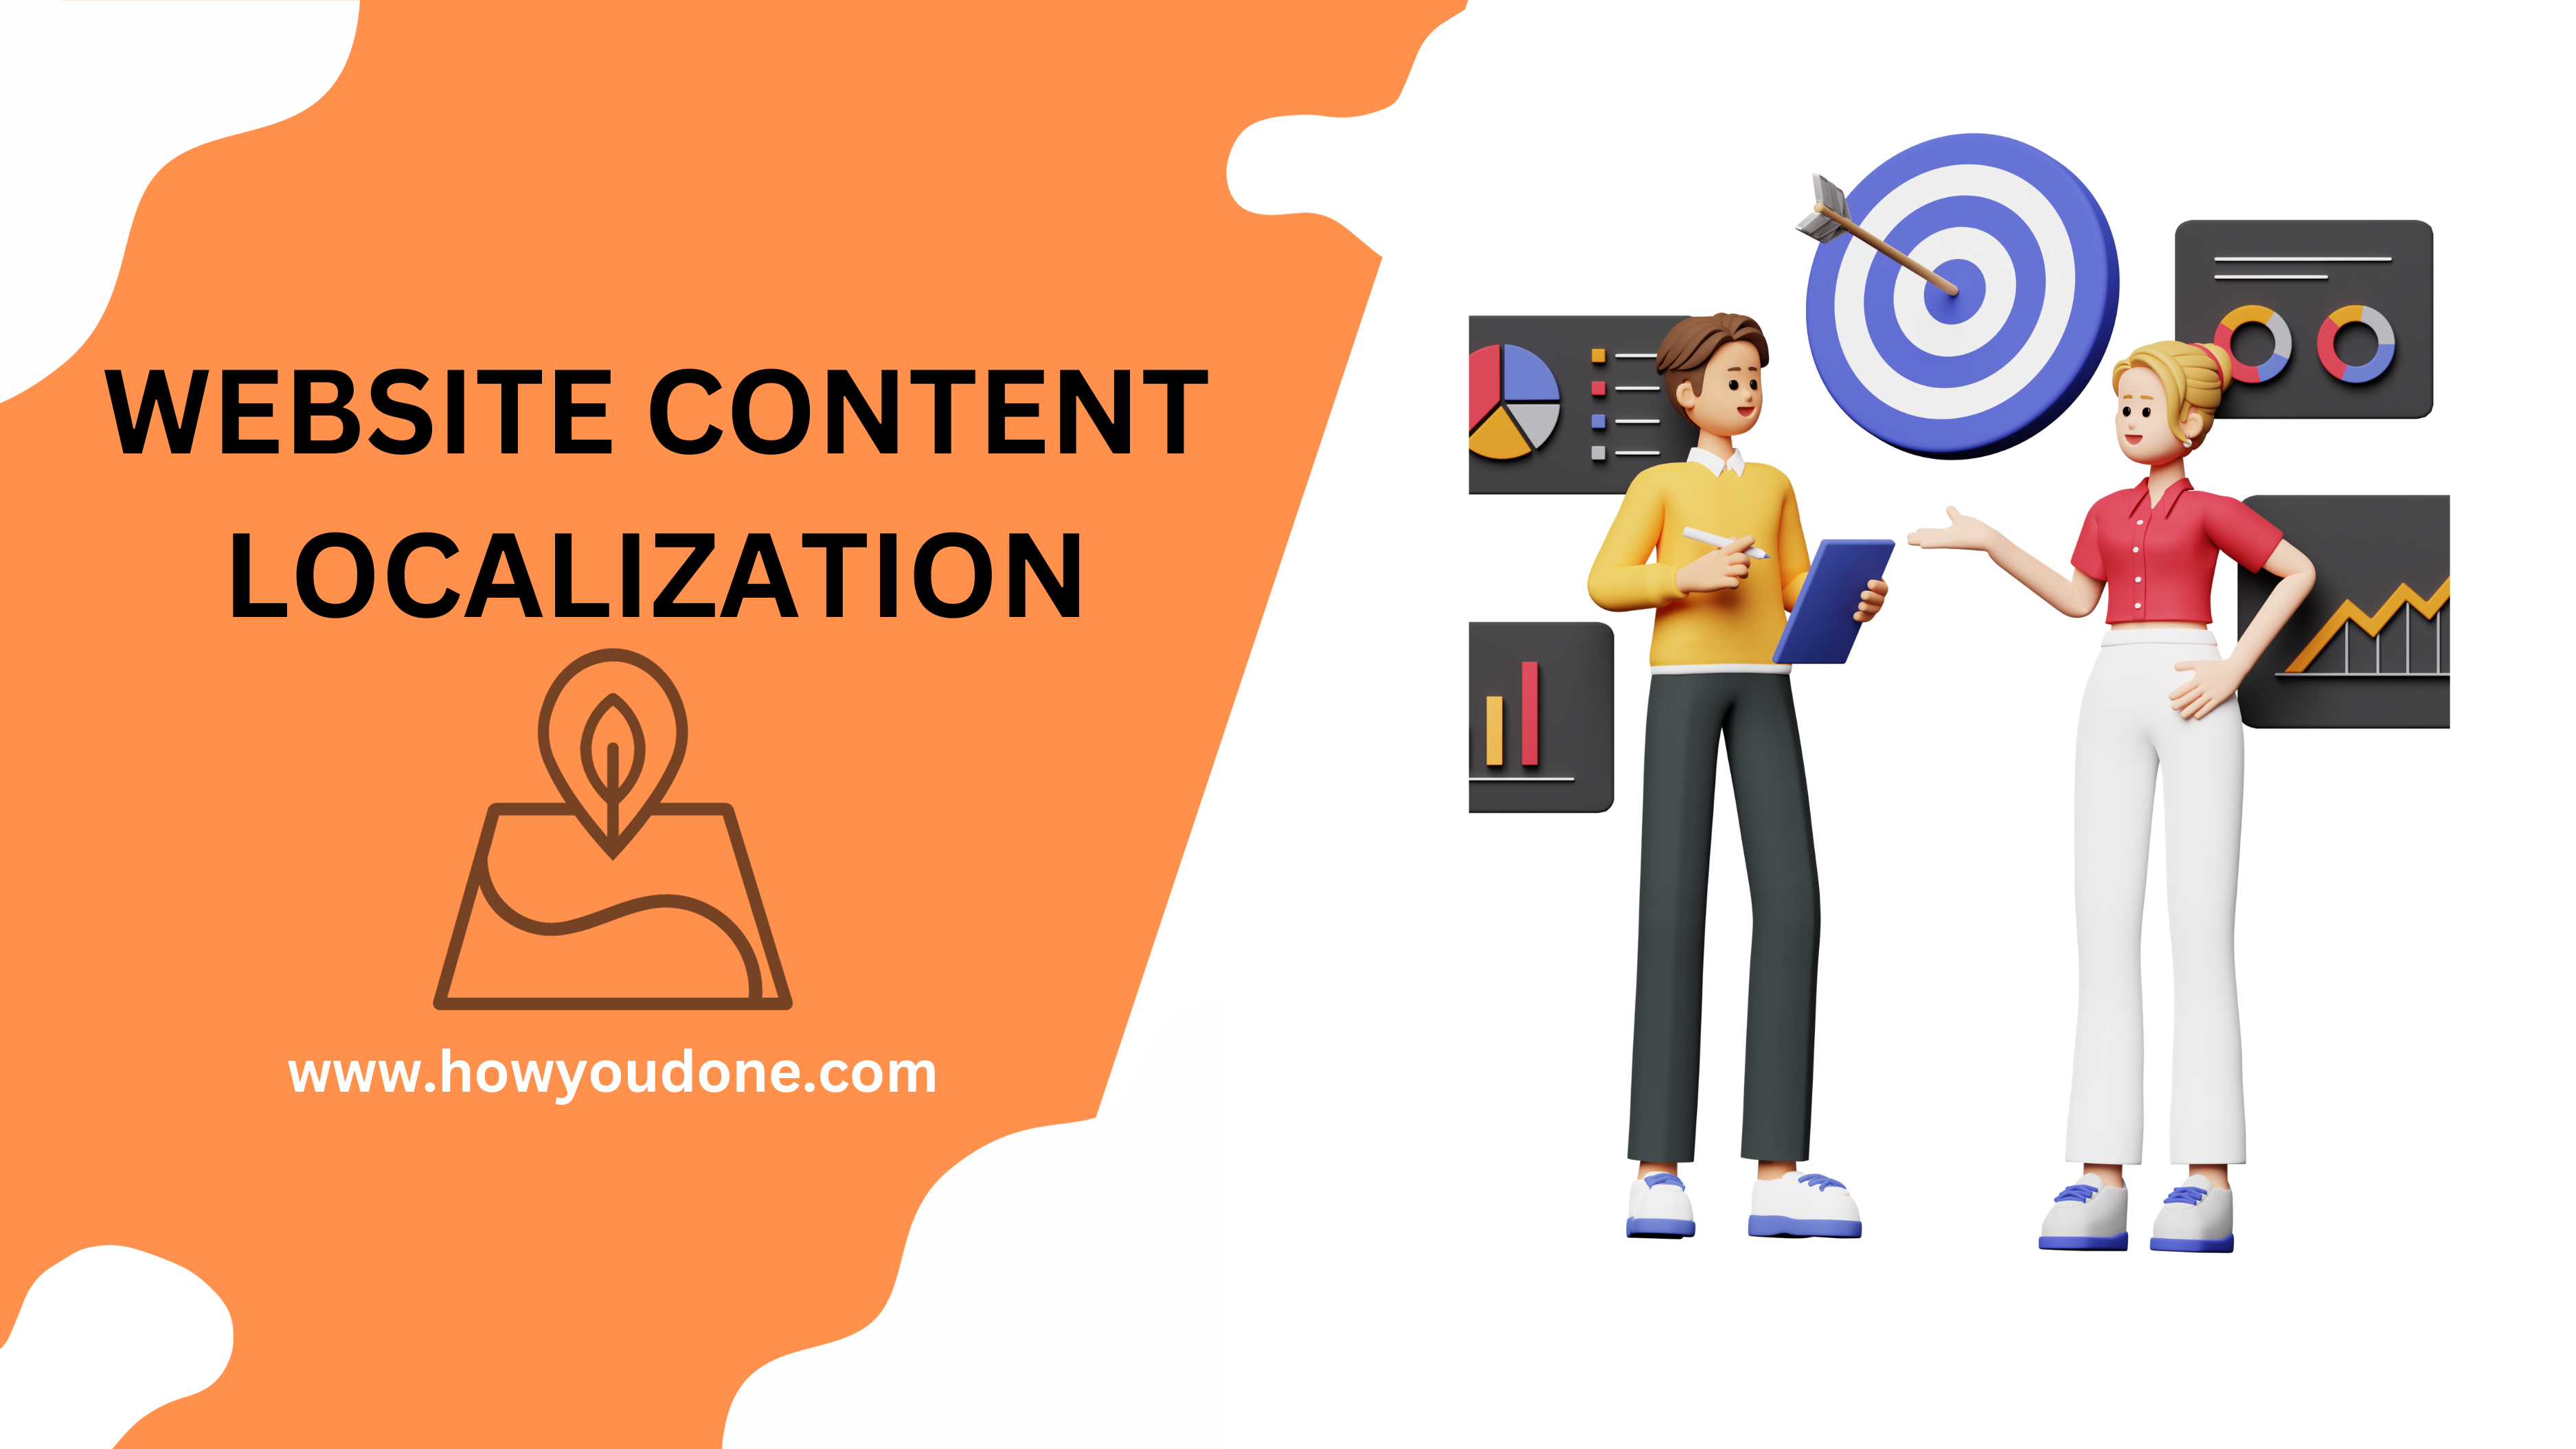 Website Content Localization for international seo